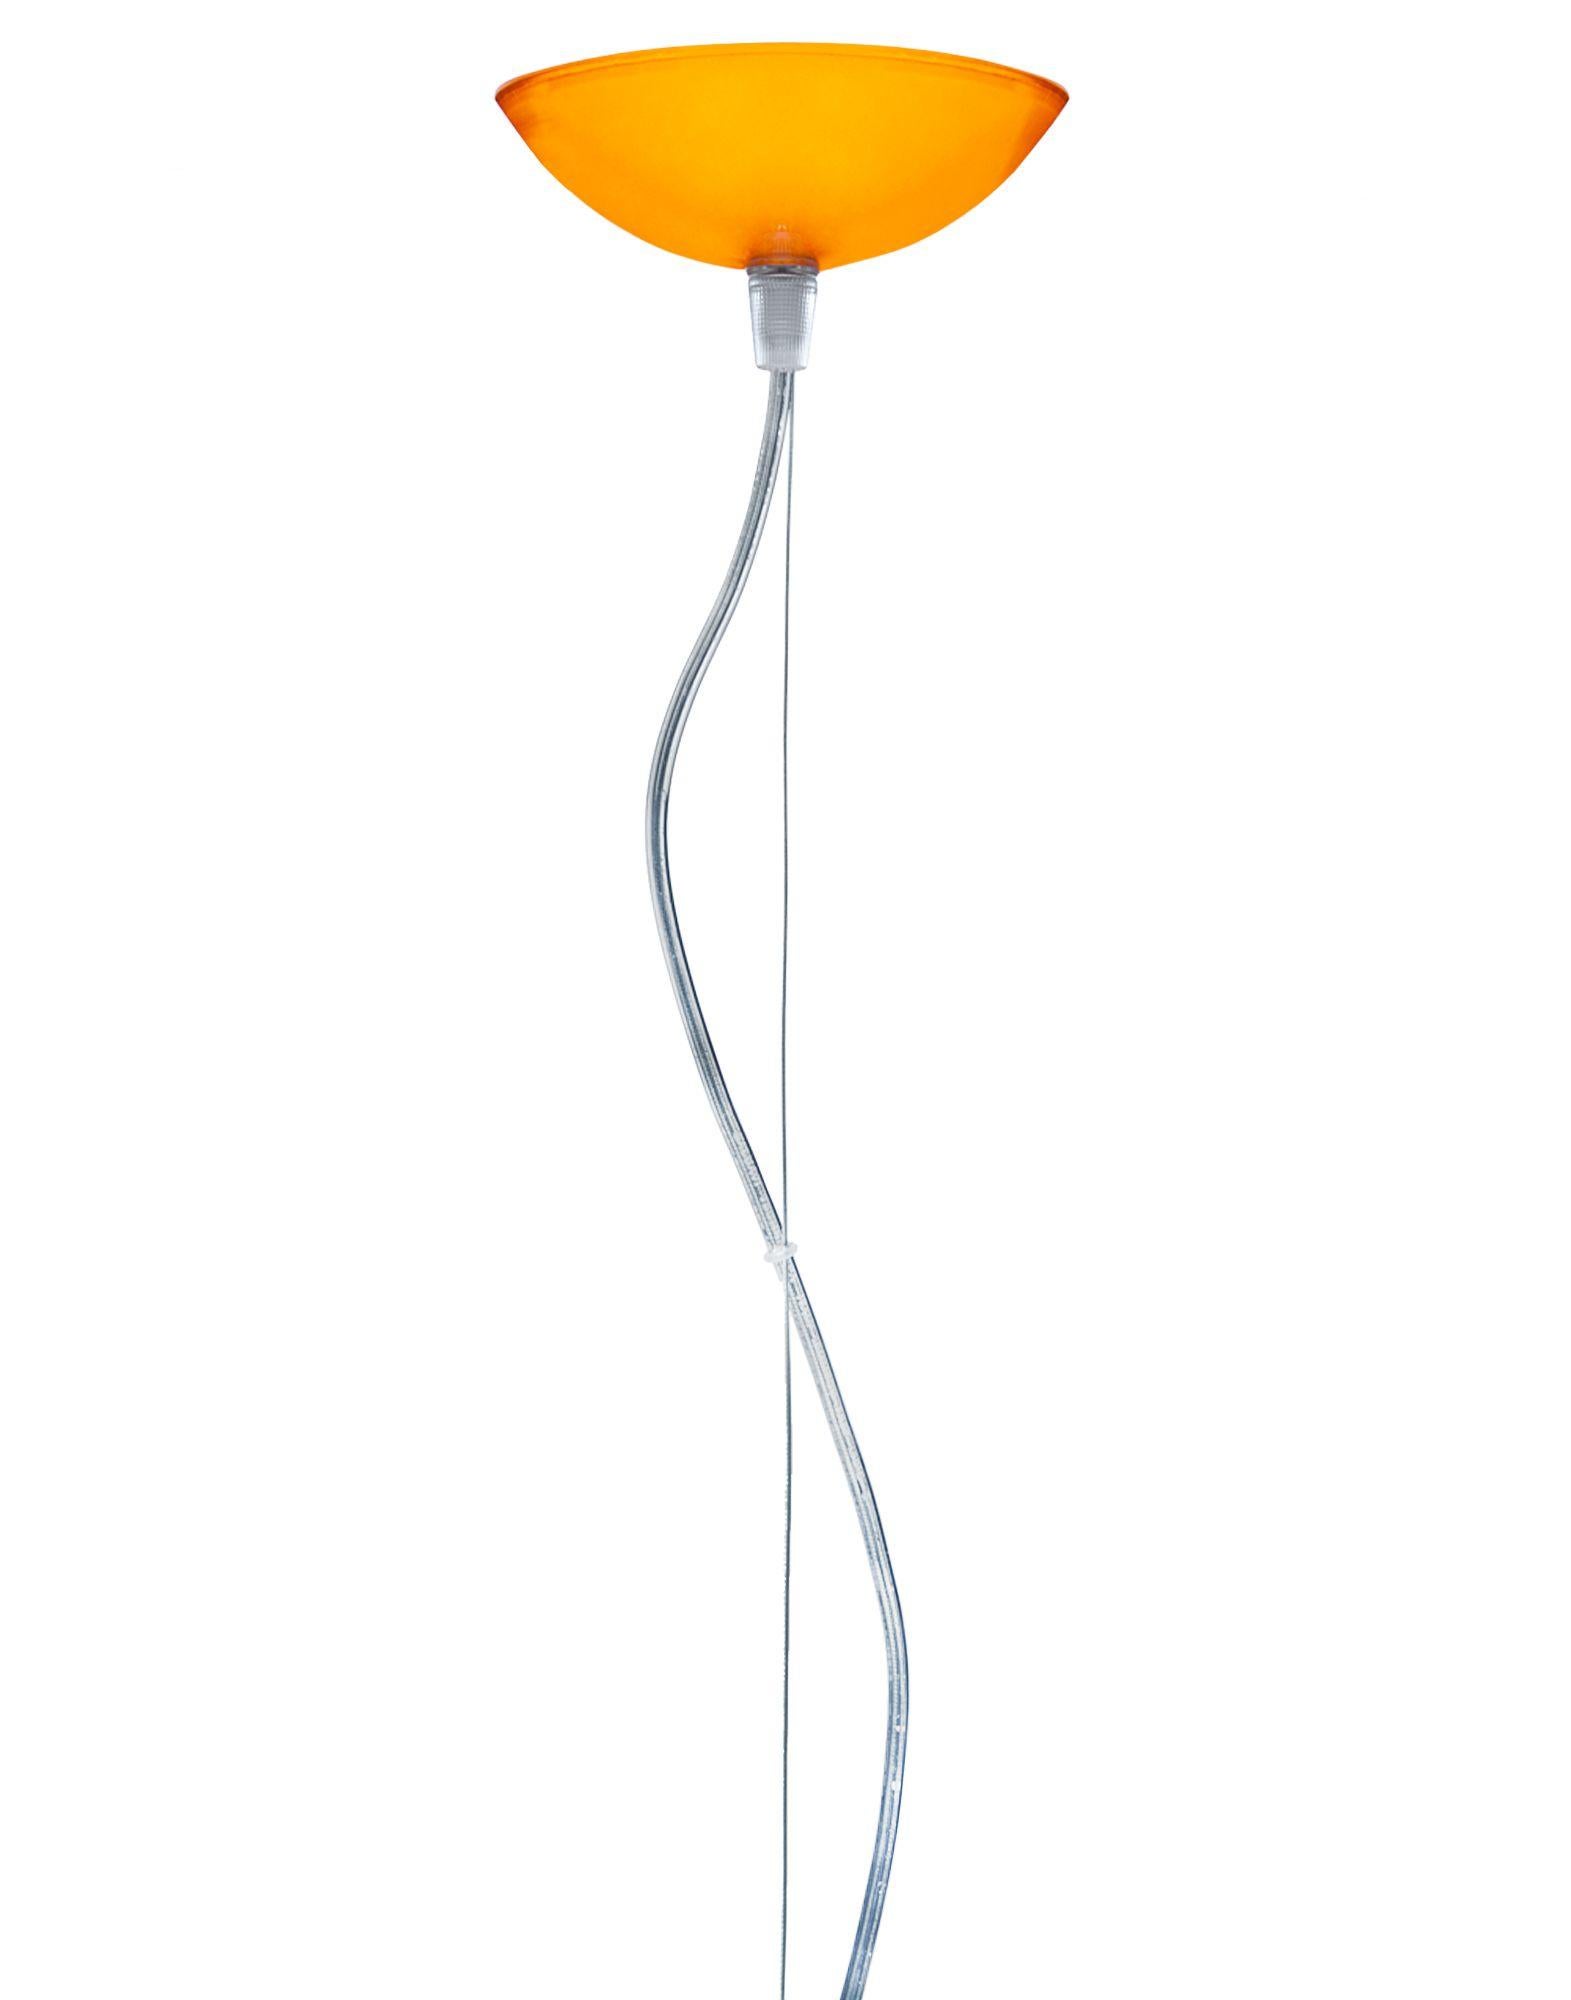 FL/Y pendant light small in orange. It is a collection of pendant lamps designed by Ferruccio Laviani in 2002.

Dimensions: Shade height: 11 in.; Diameter: 15 in.; Unit weight: 1.08 kg. Made of: PMMA. Assembly required. Voltage: 120. Cord length